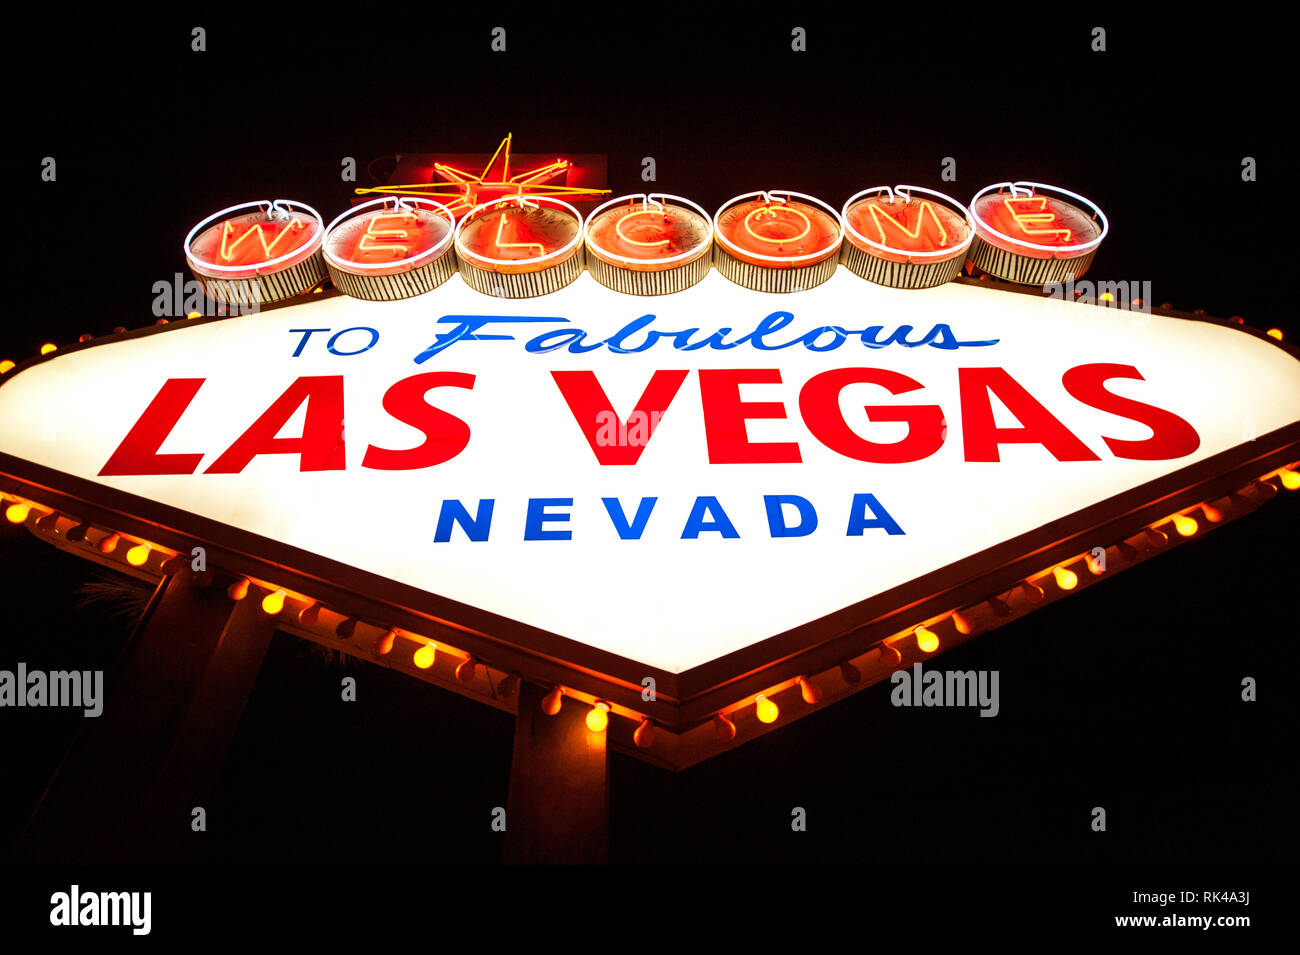 Welcome to Fabulous Las Vegas Nevada sign at night Stock Photo